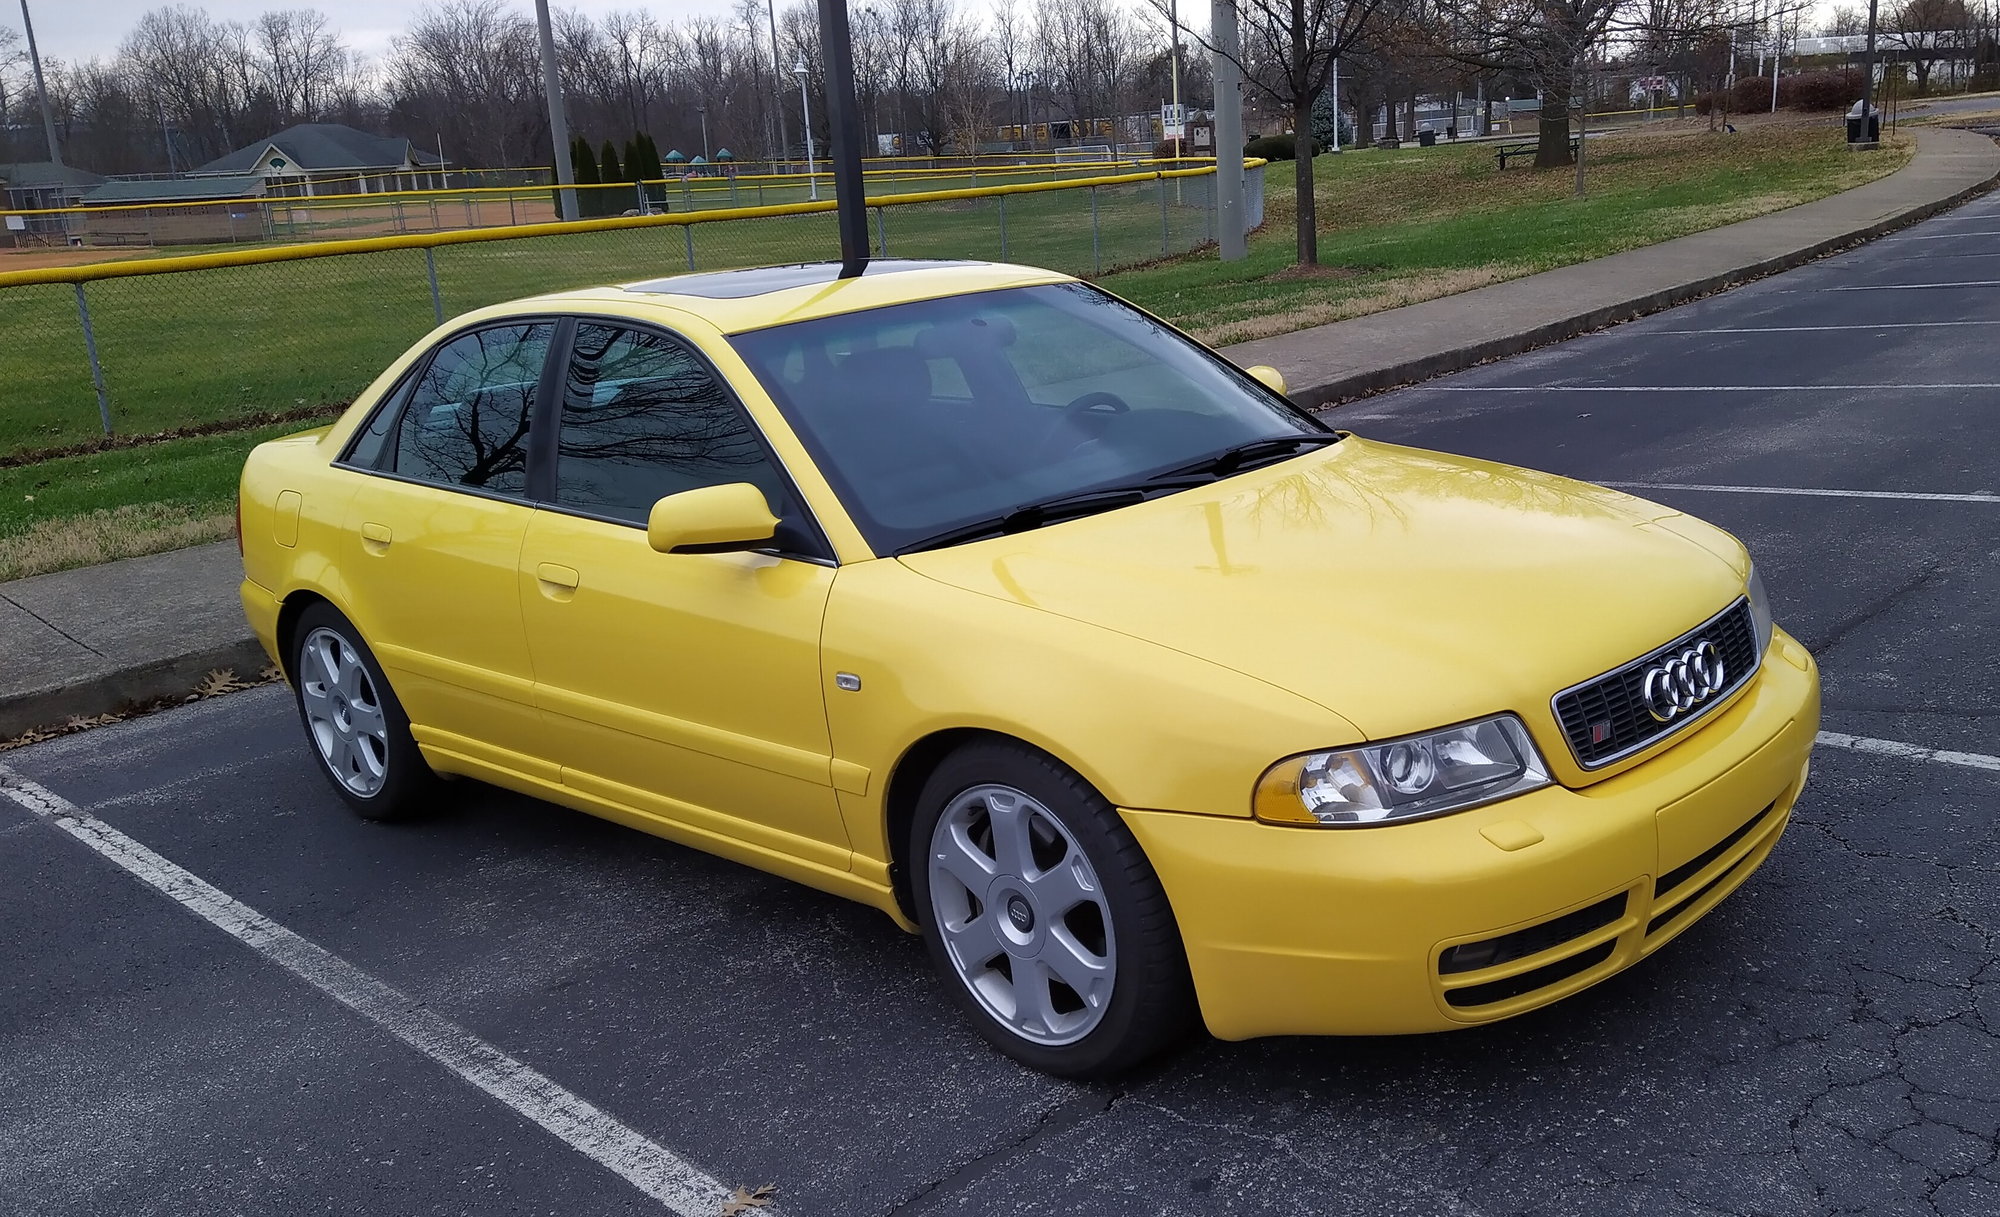 2001 Audi S4 - 2001 Imola Yellow Audi S4 for sale - Used - VIN WAURD68D11A021857 - 127,650 Miles - 6 cyl - AWD - Manual - Sedan - Yellow - Louisville, KY 40299, United States